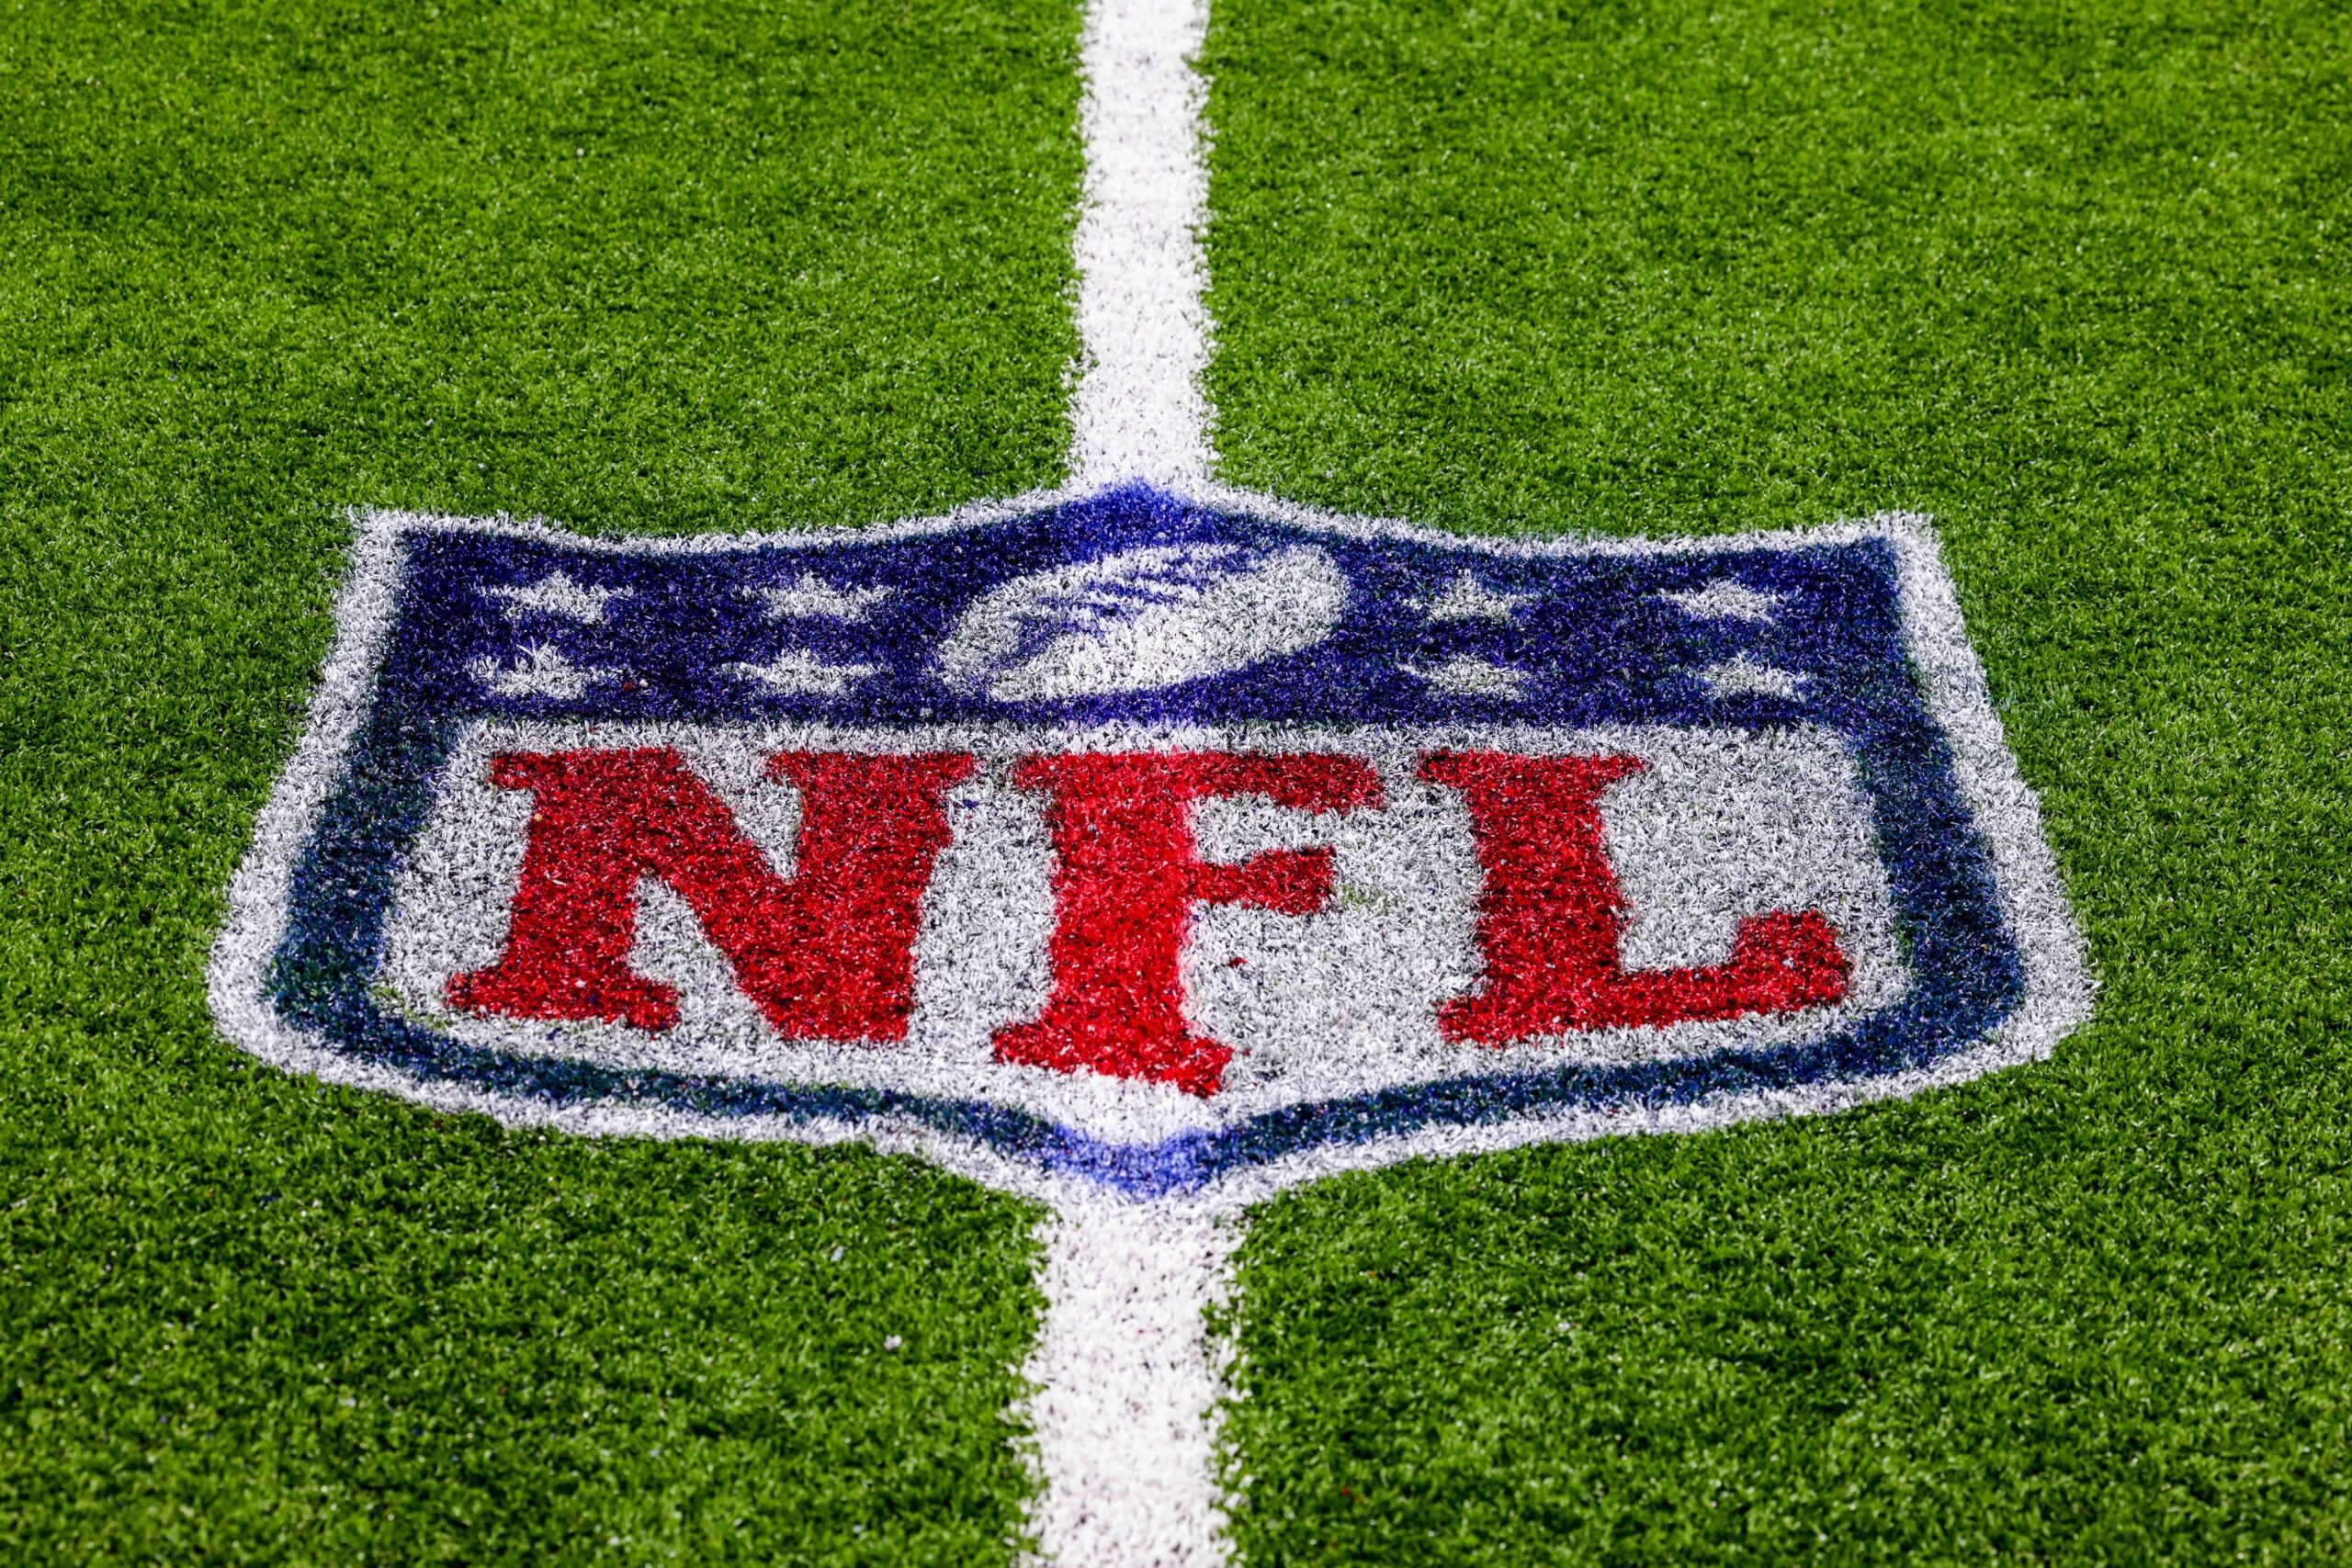 What channel are the NFL preseason games on tonight? How to watch